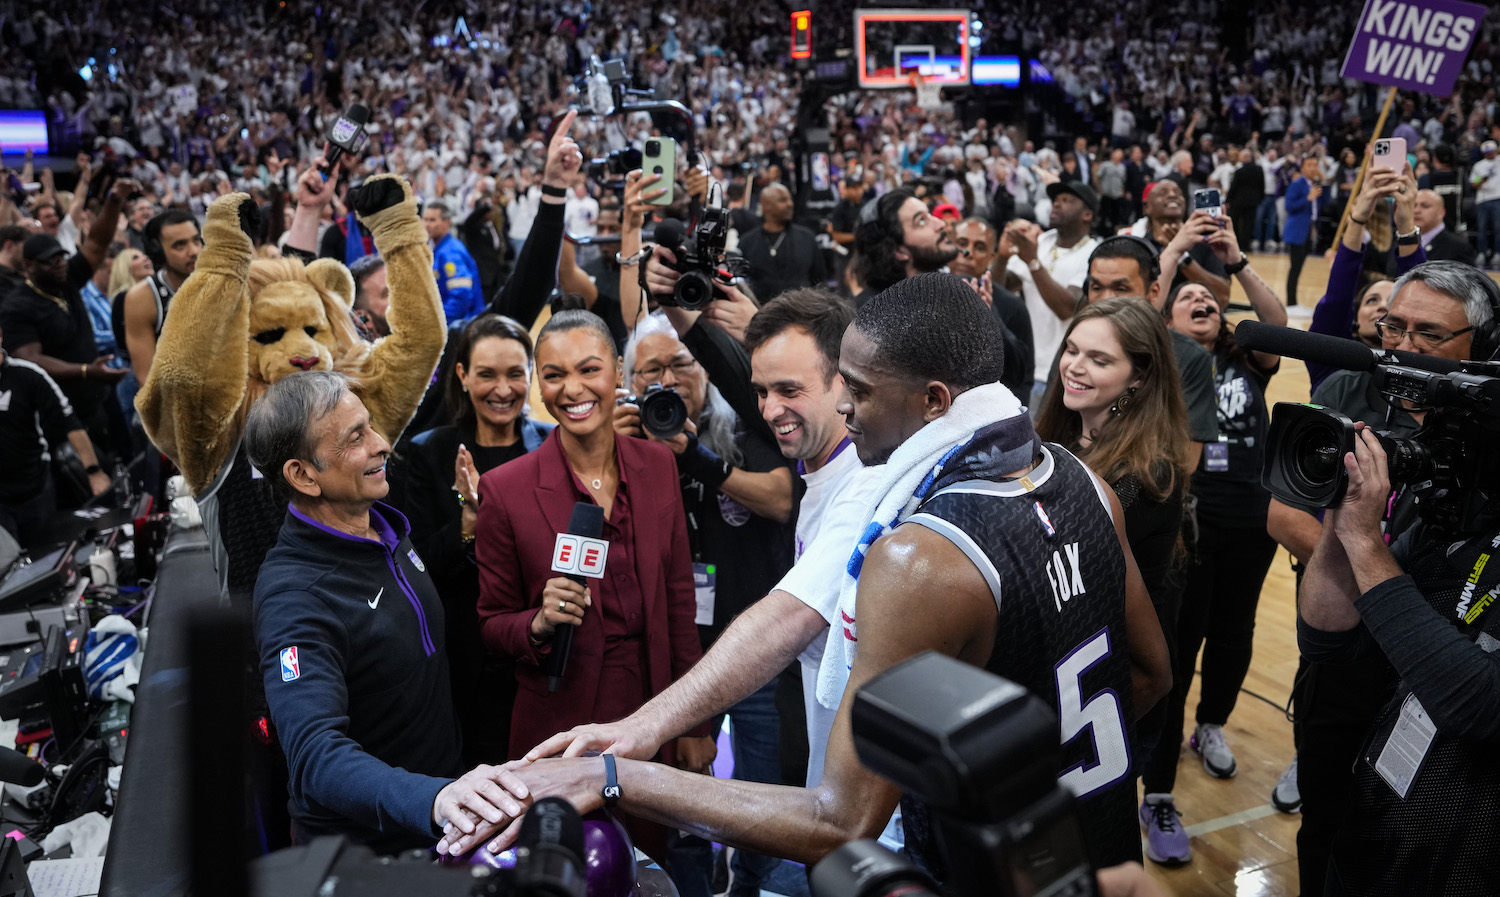 A Decade After Sacramento Showed Up for the Kings, the Kings Return the  Favor - The New York Times